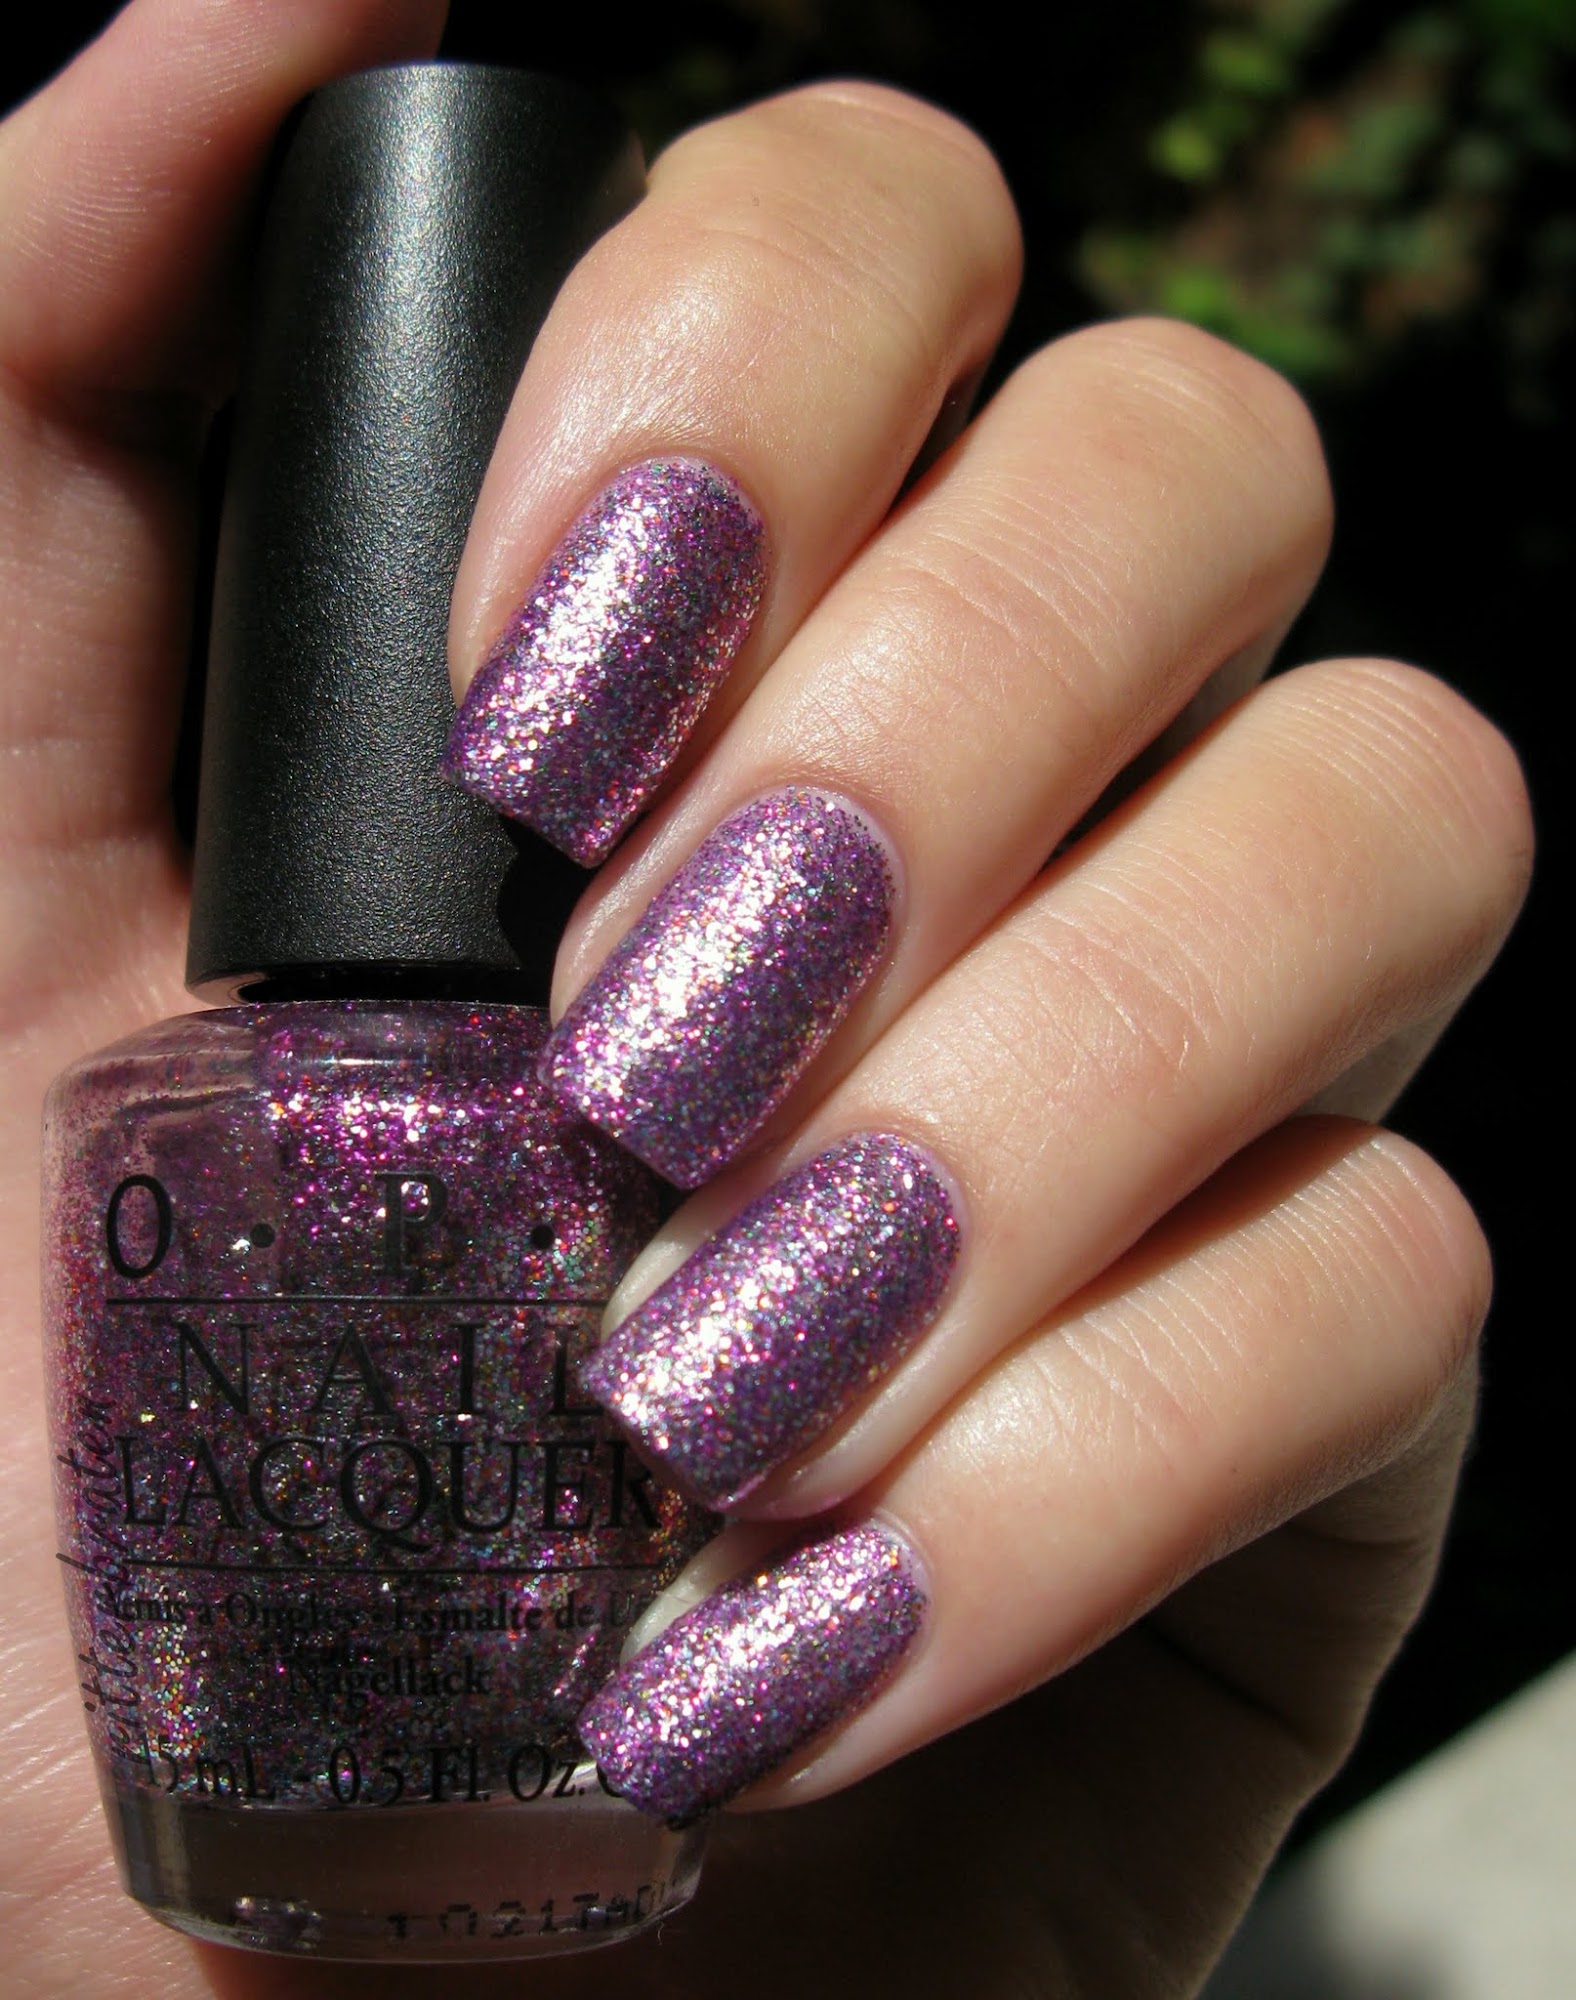 OPI Show It And Glow It